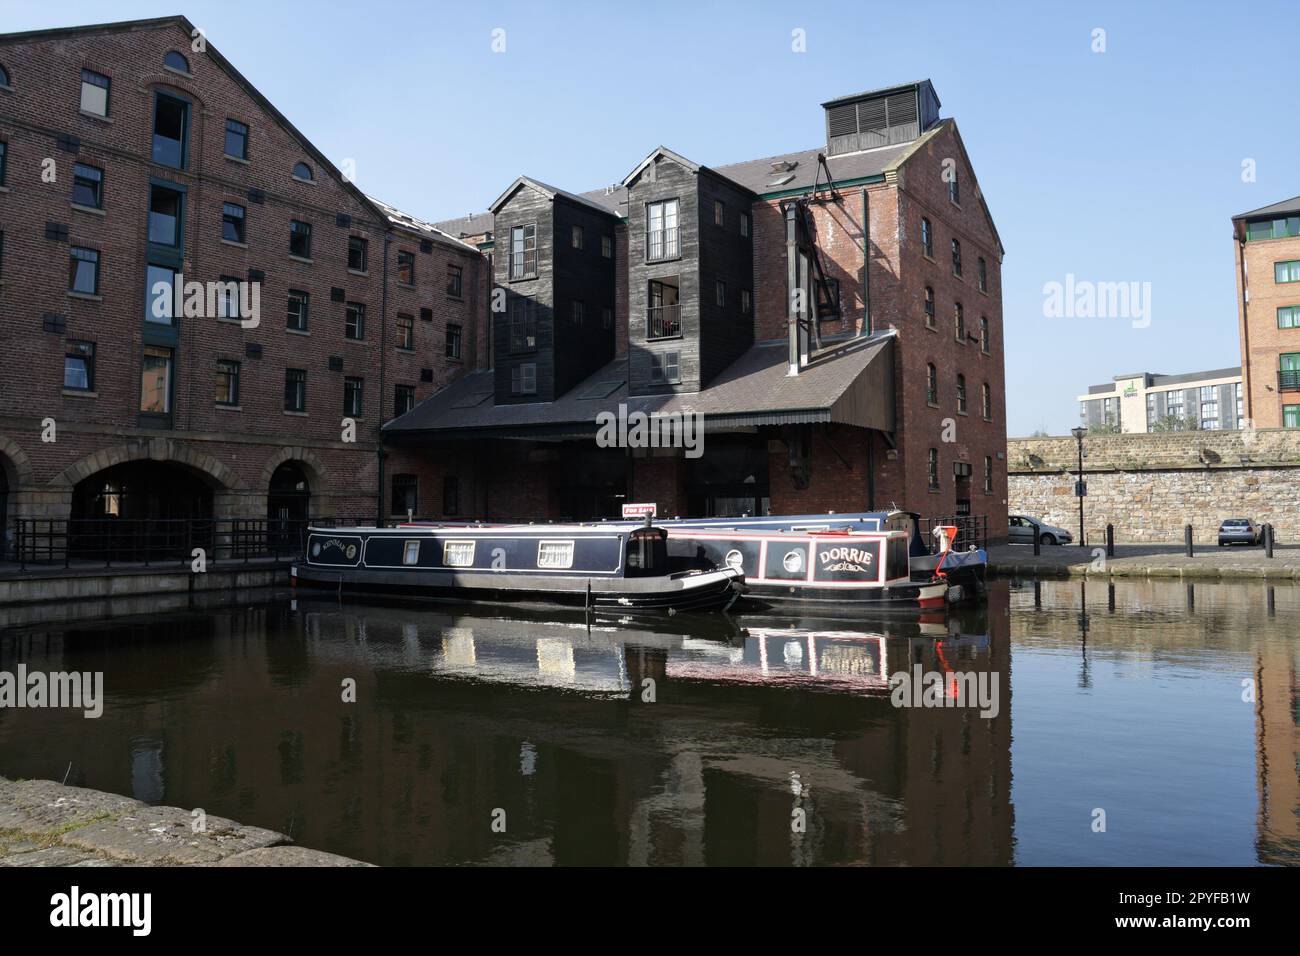 The Terminal Warehouse at Victoria Quays Sheffield canal wharf, England. Preserve industrial building, converted to housing flats Stock Photo